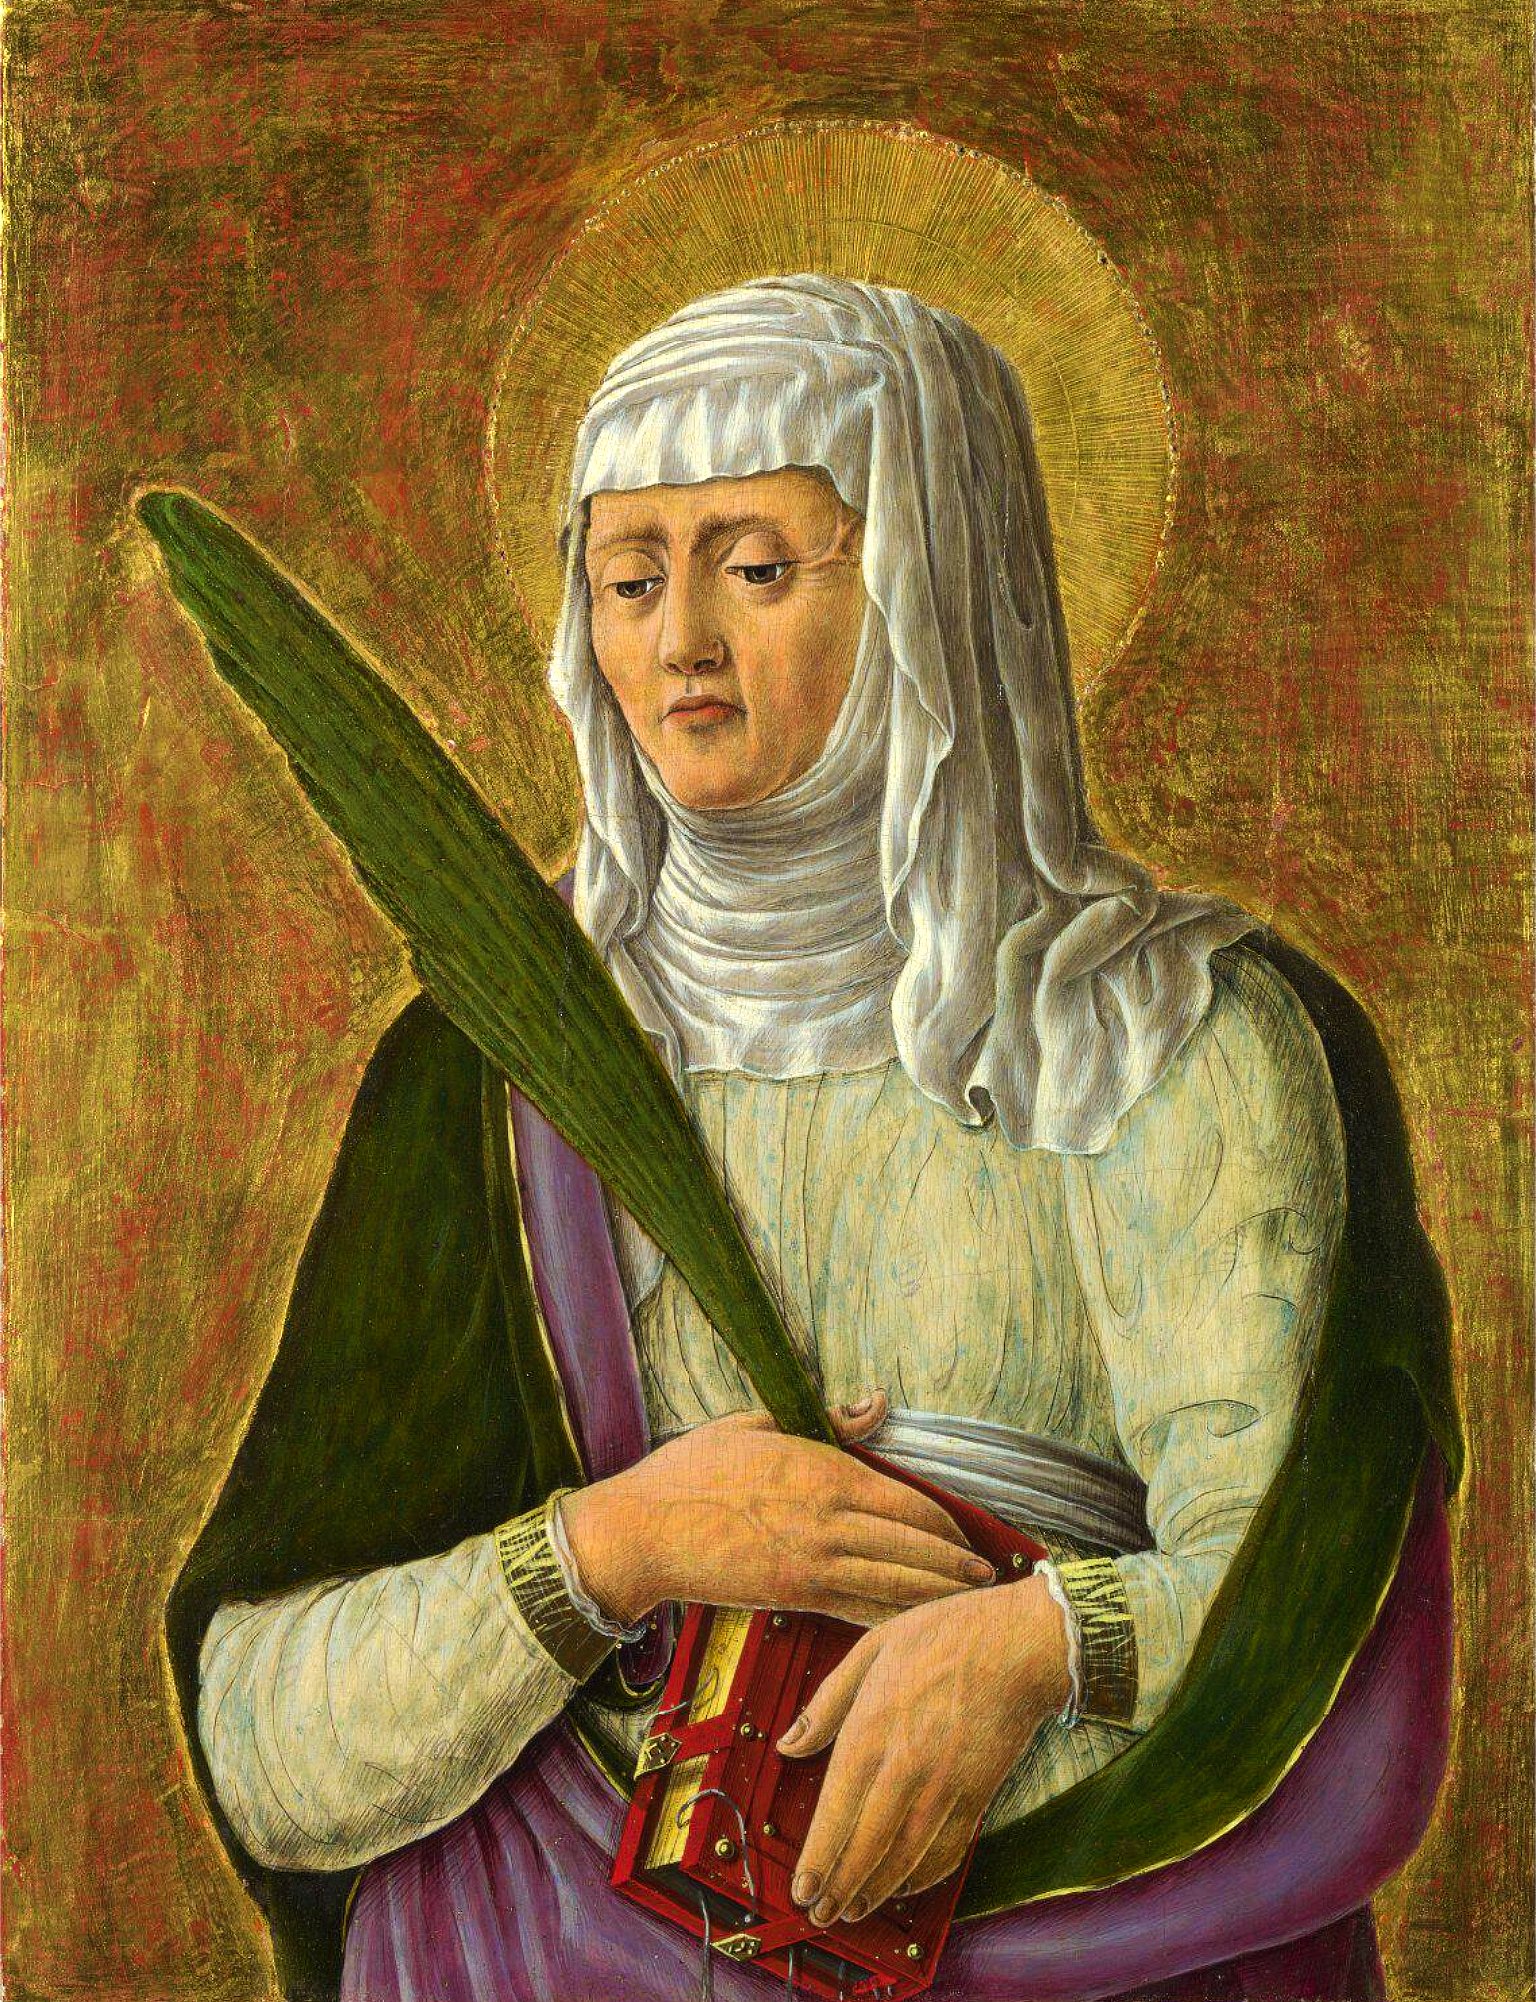 A painting of a female saint. The saint is wearing a white head covering and a purple robe. The saint is holding a green palm frond and a red book. The background is gold with a halo around the saint’s head.